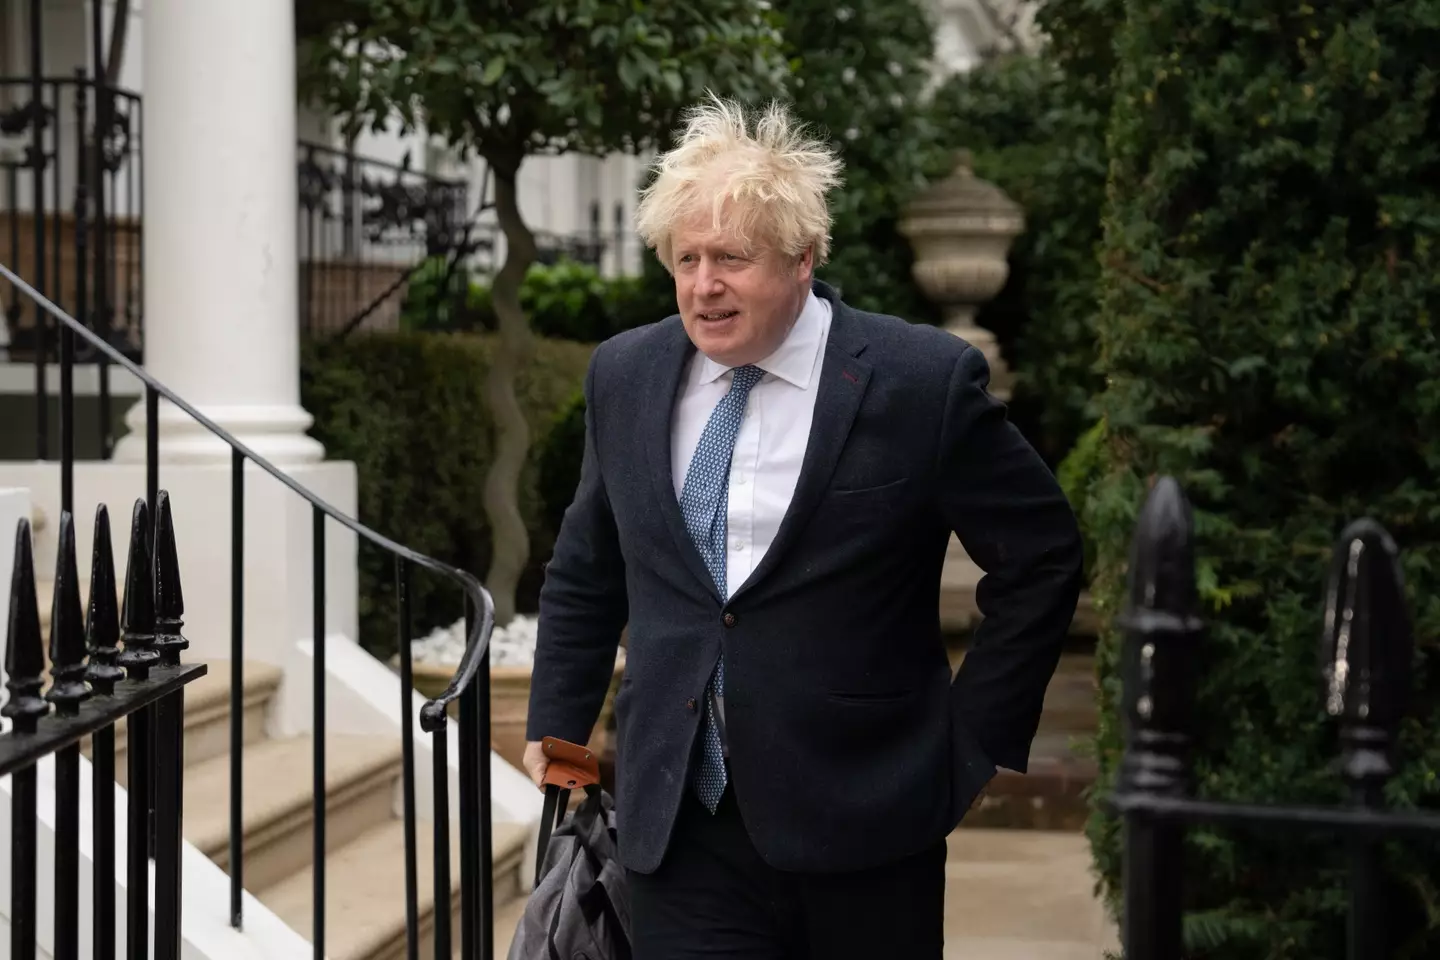 The Covid inquiry has heard that Boris Johnson suggested blowing a hairdryer up the nose would cure the virus.